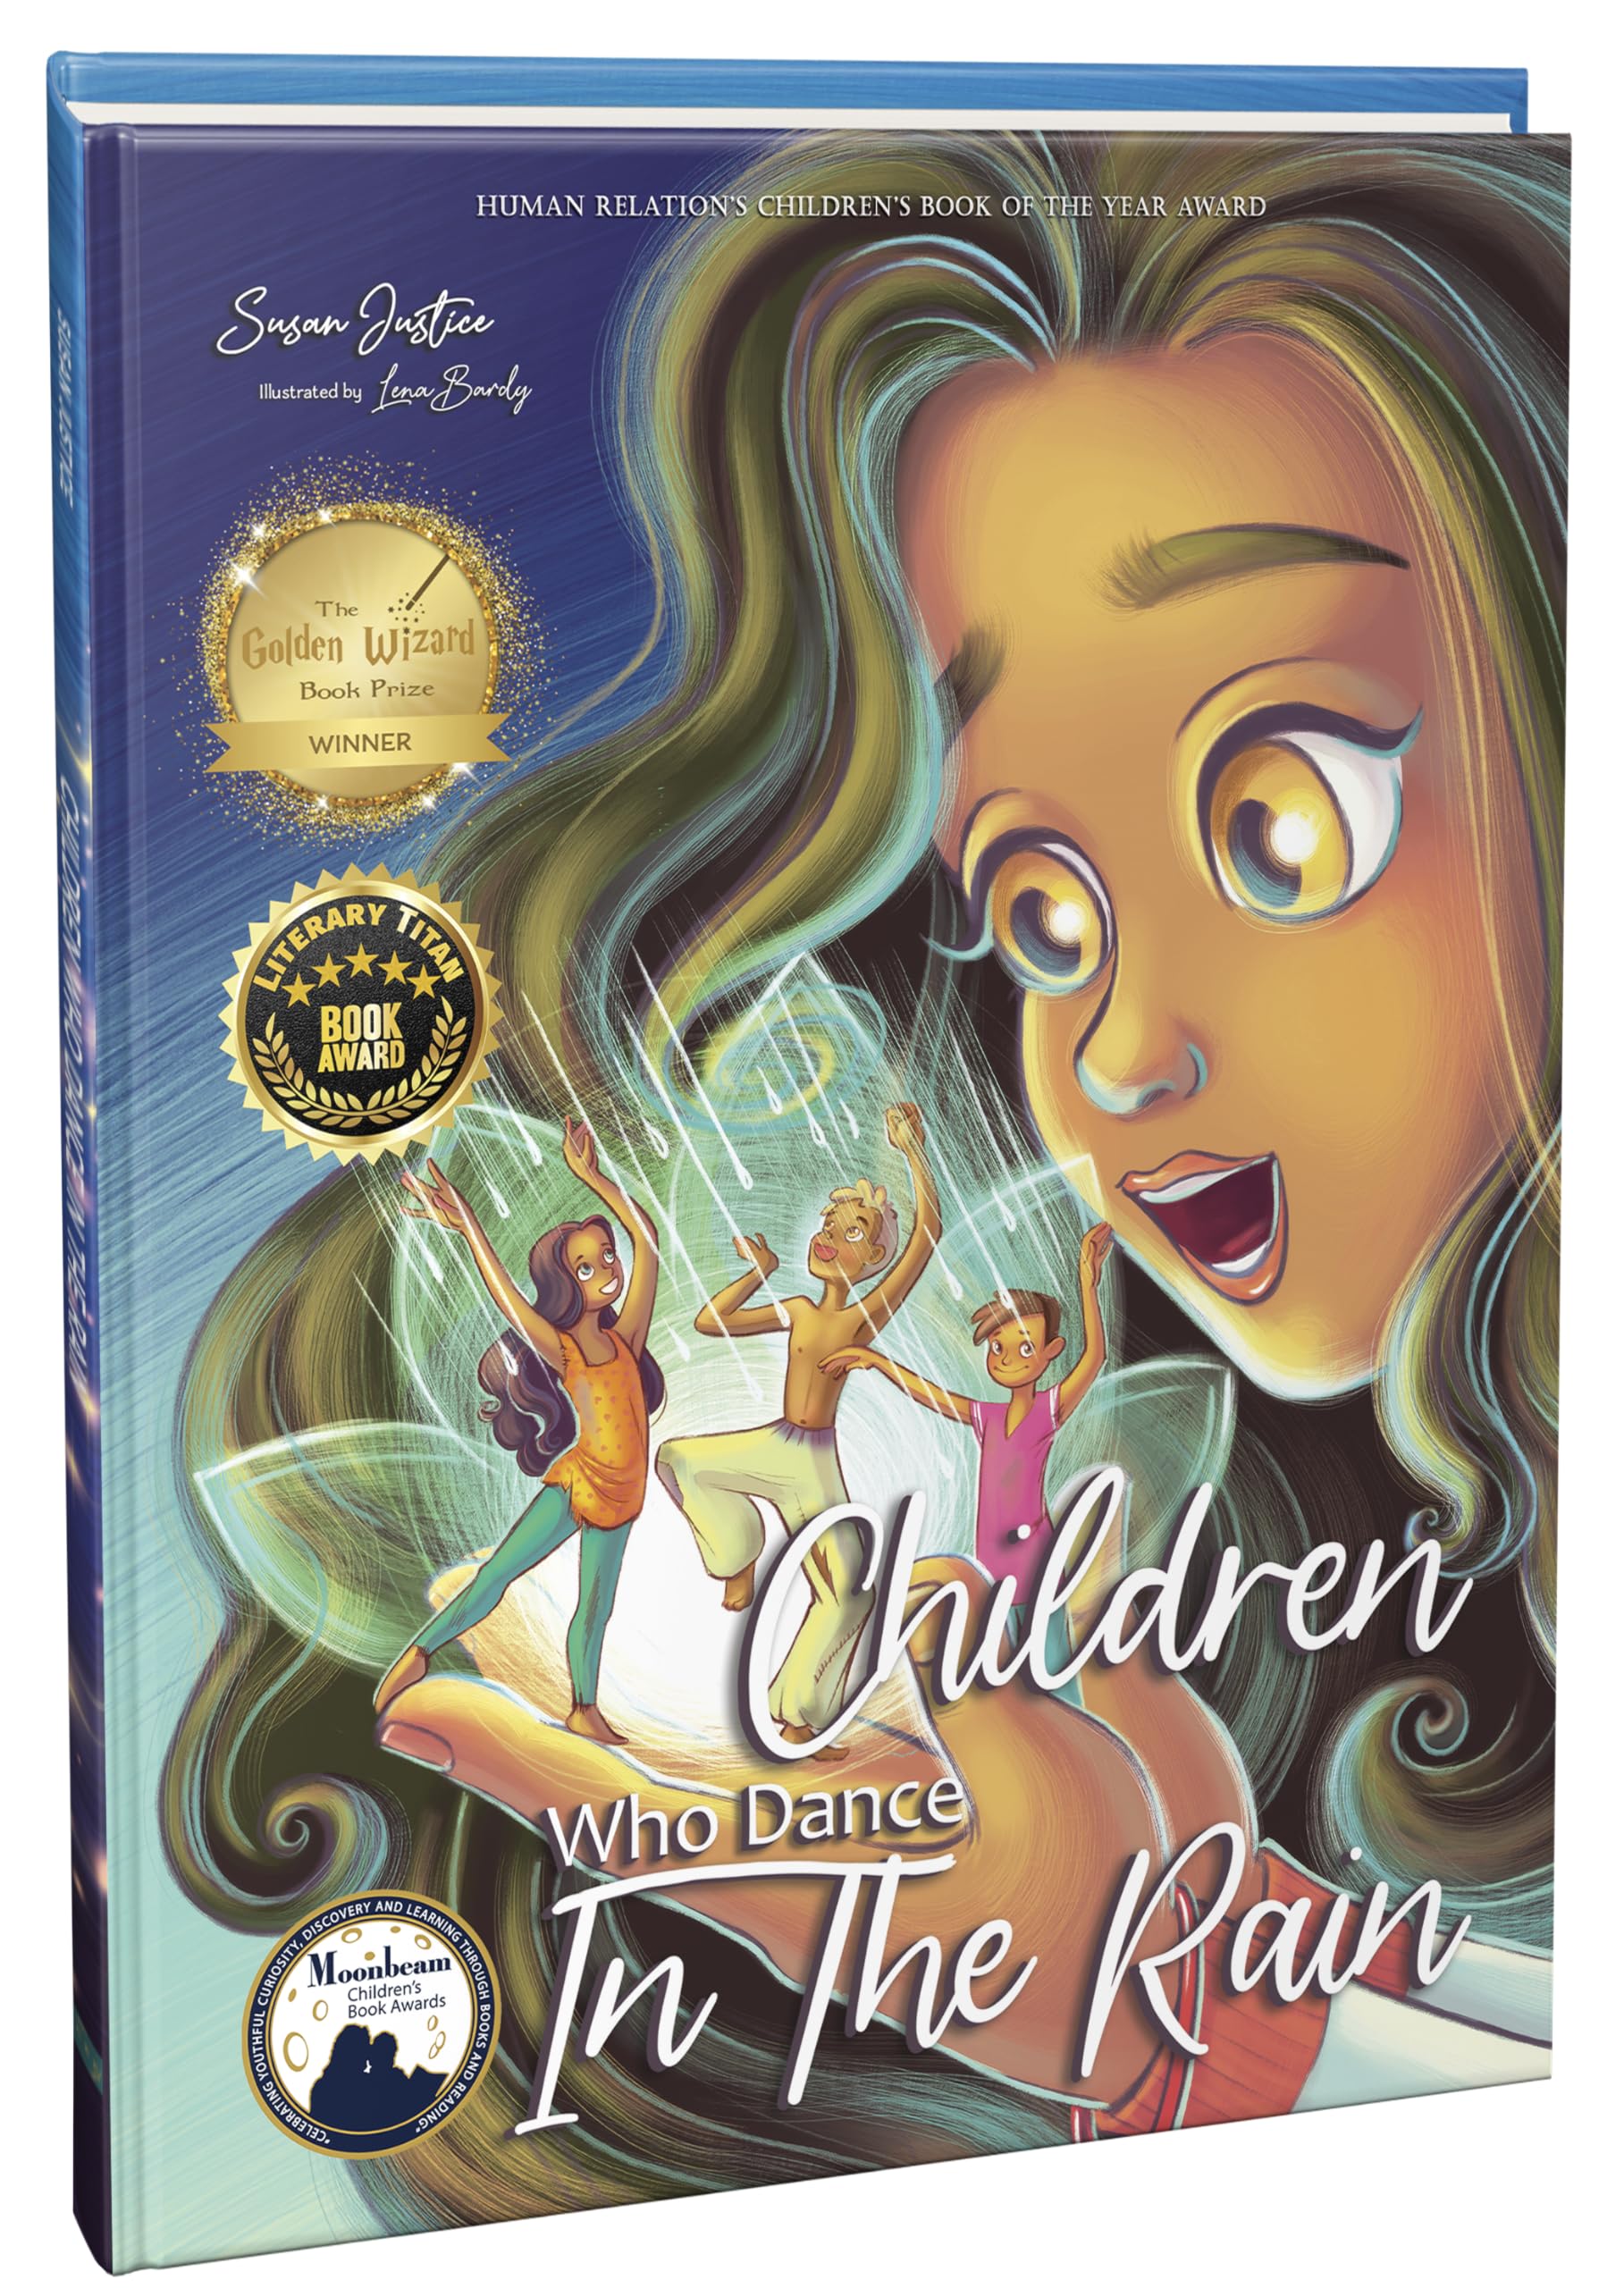 Children Who Dance in the Rain: Children's Book of the Year Award, a Book about Kindness, Gratitude, and a Child's Determination to Change the World by Susan Justice